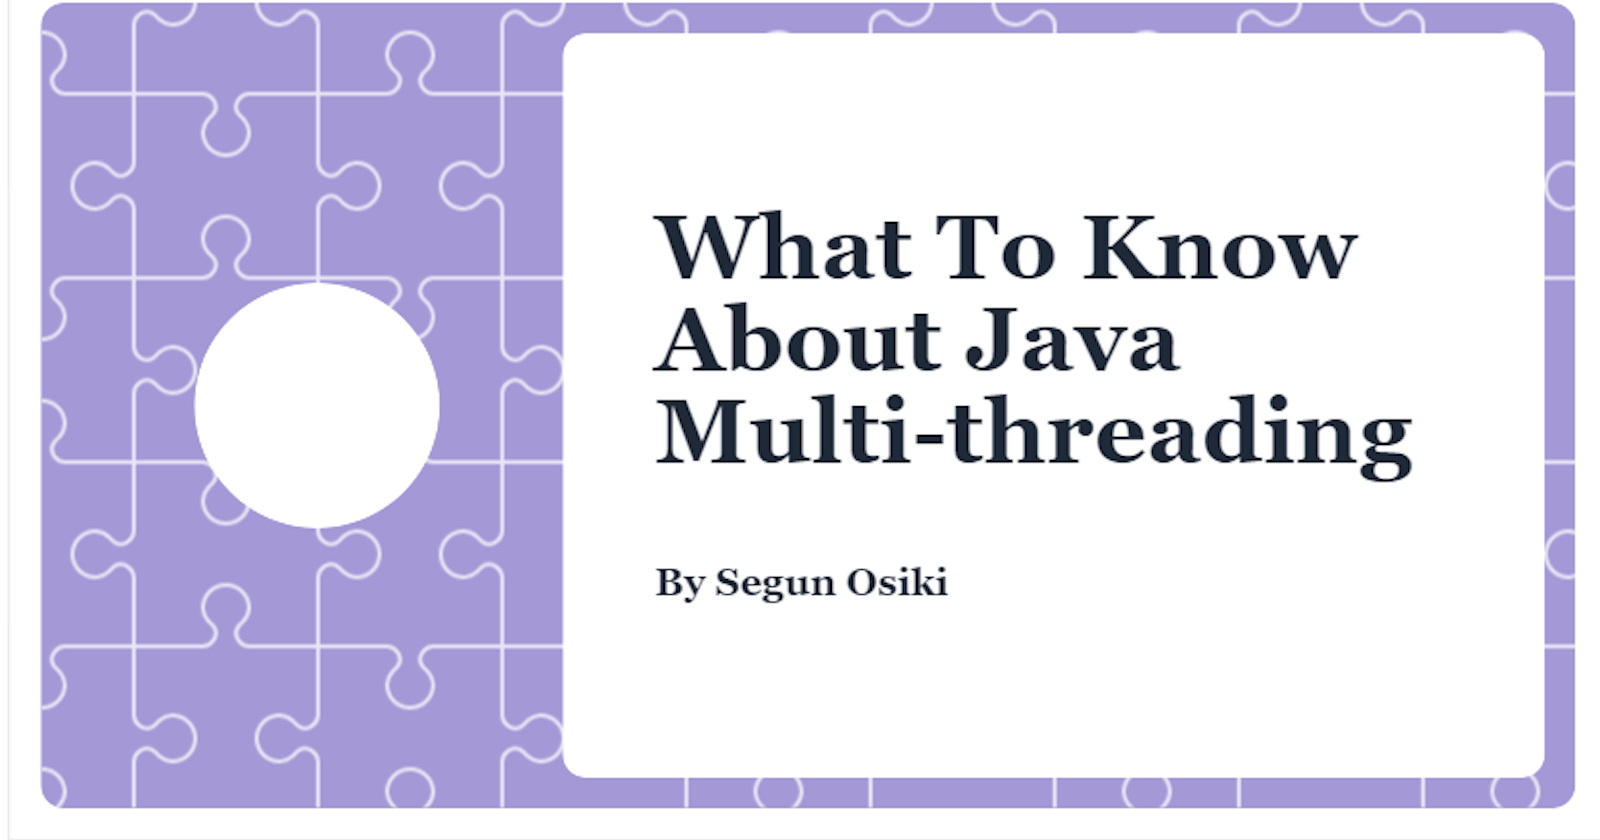 What Is Multi-threading?